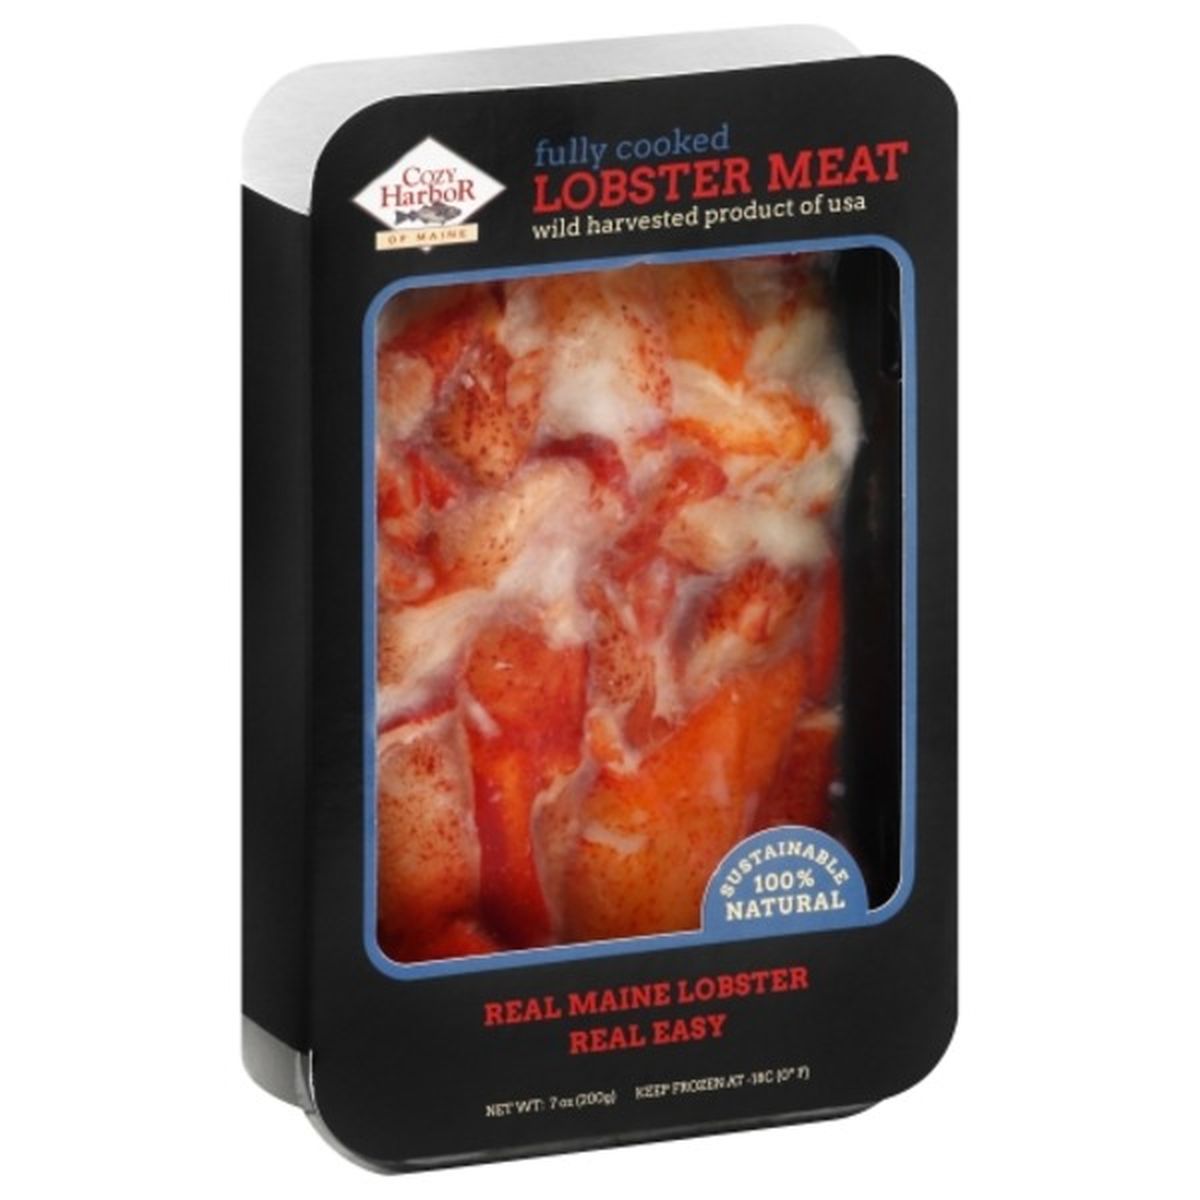 Calories in Cozy Harbor Lobster Meat, 100% Natural, Fully Cooked